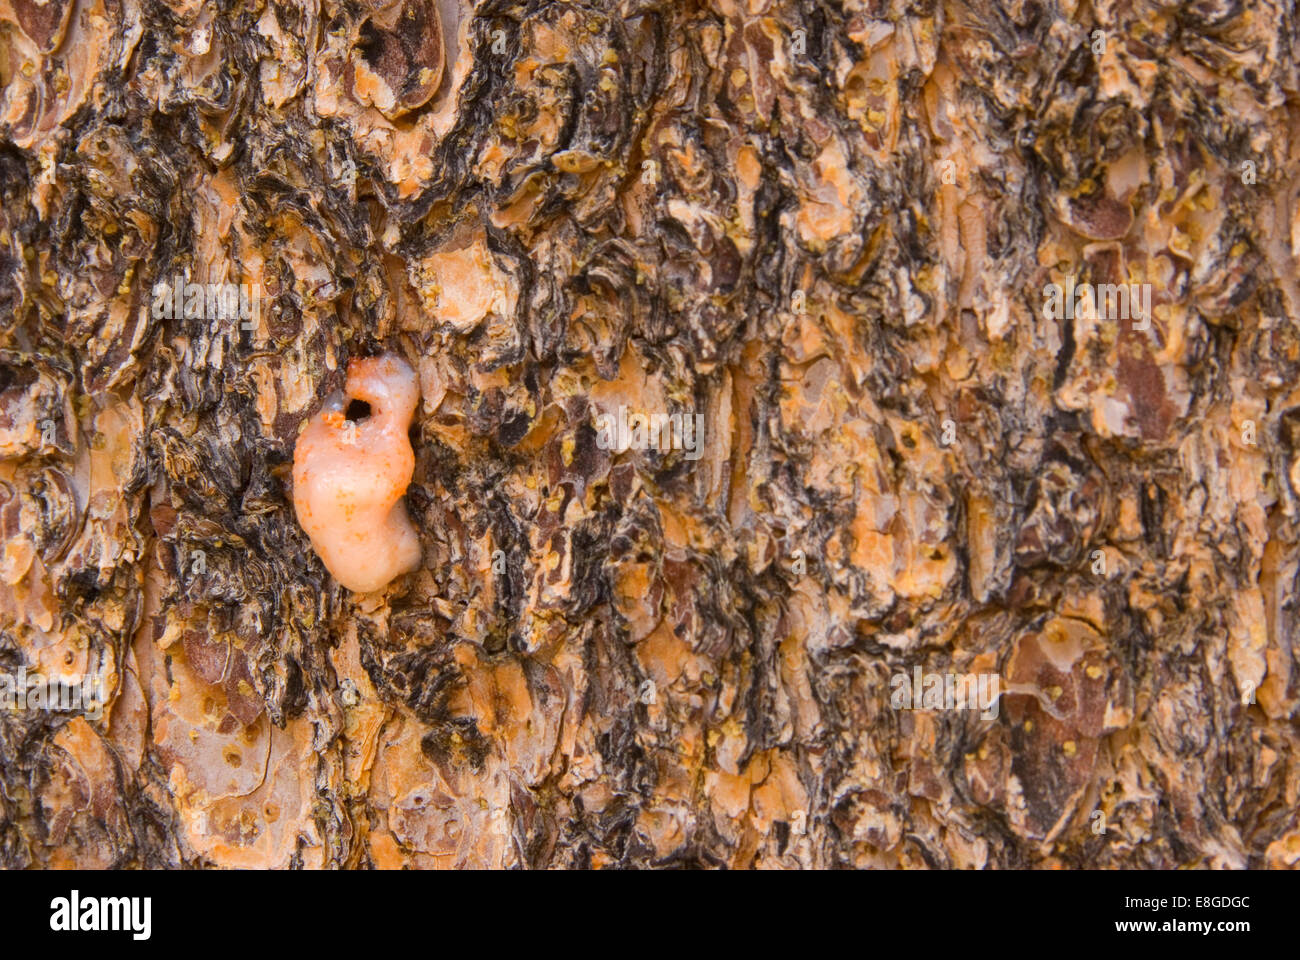 Pine with sap at insect hole, Yosemite National Park, California Stock Photo